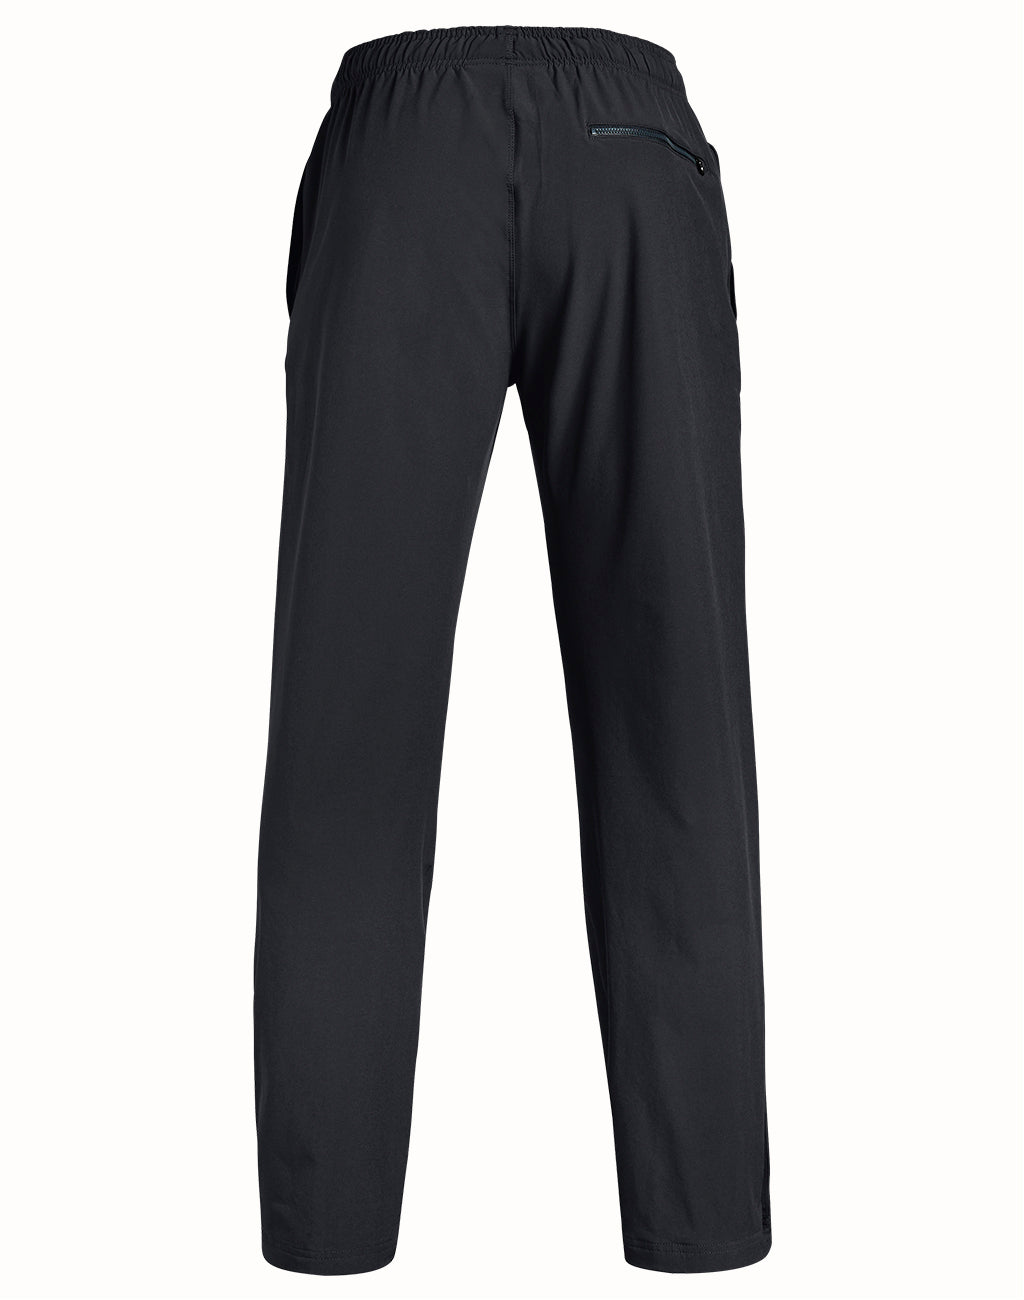 under armour hockey warm up pants